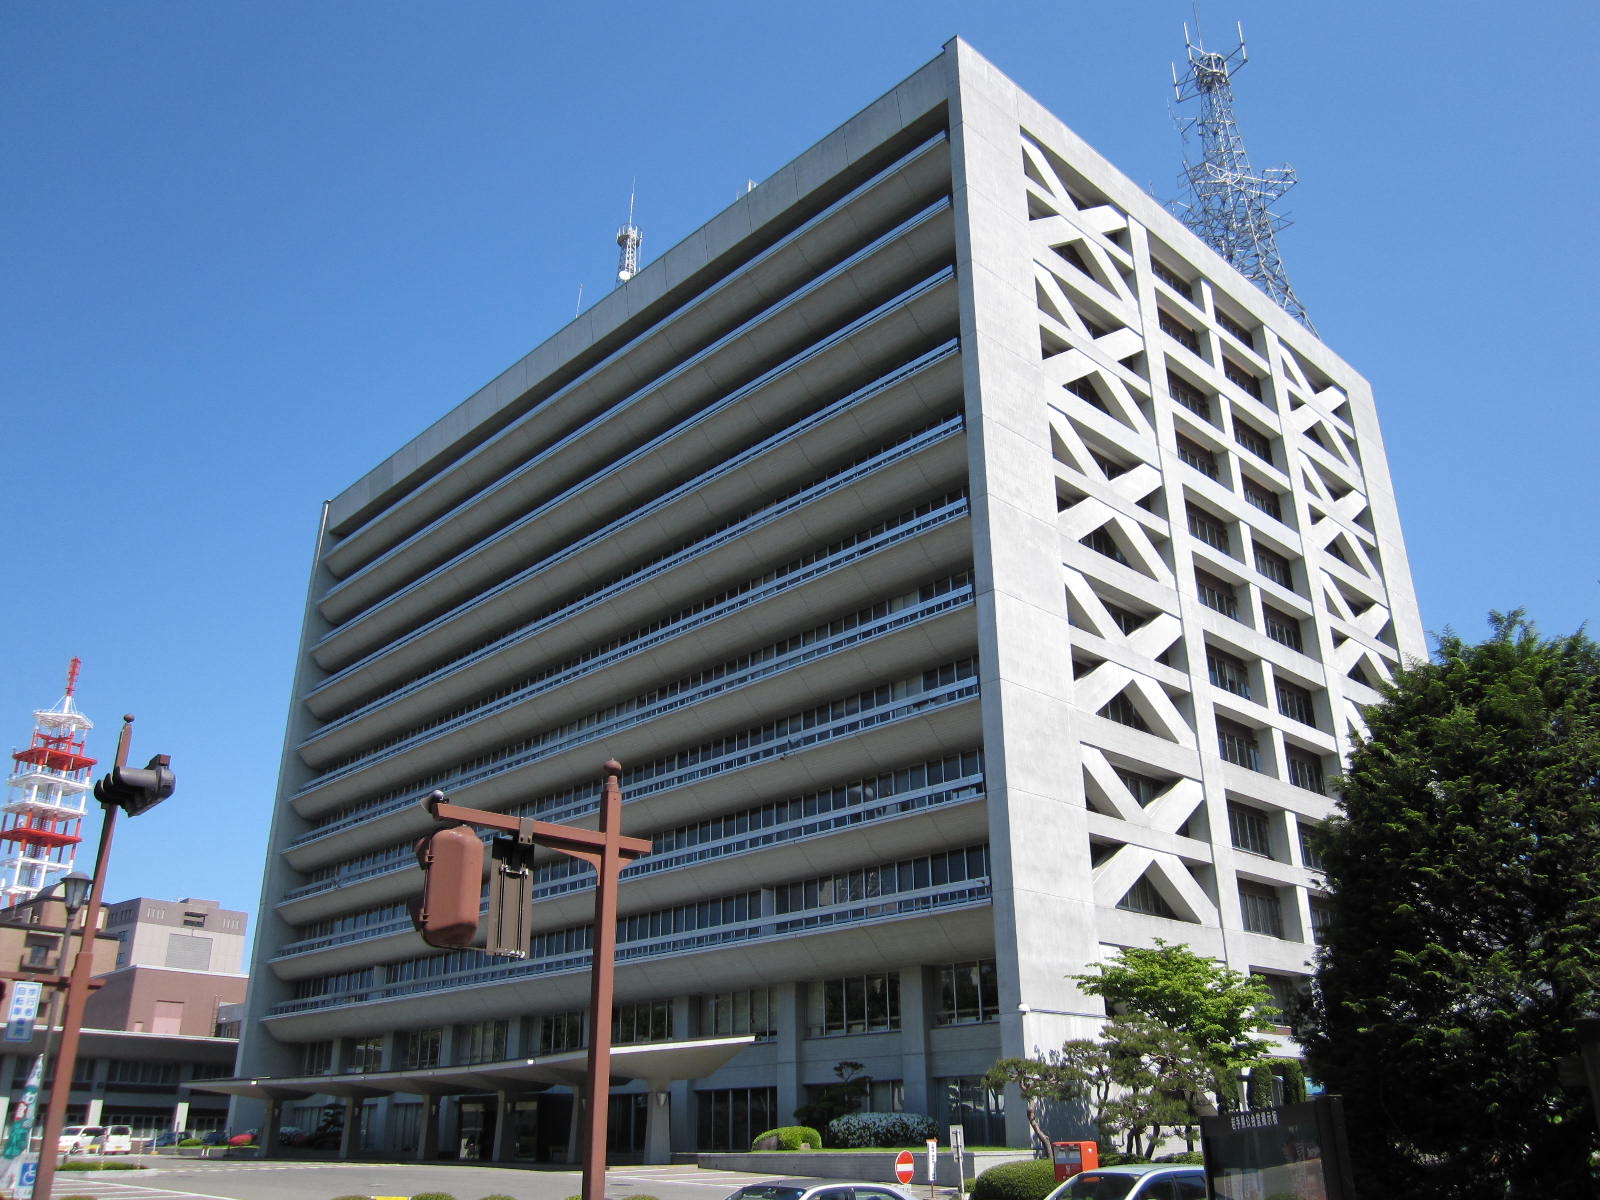 Government office. 764m to the Iwate Prefectural Office (government office)